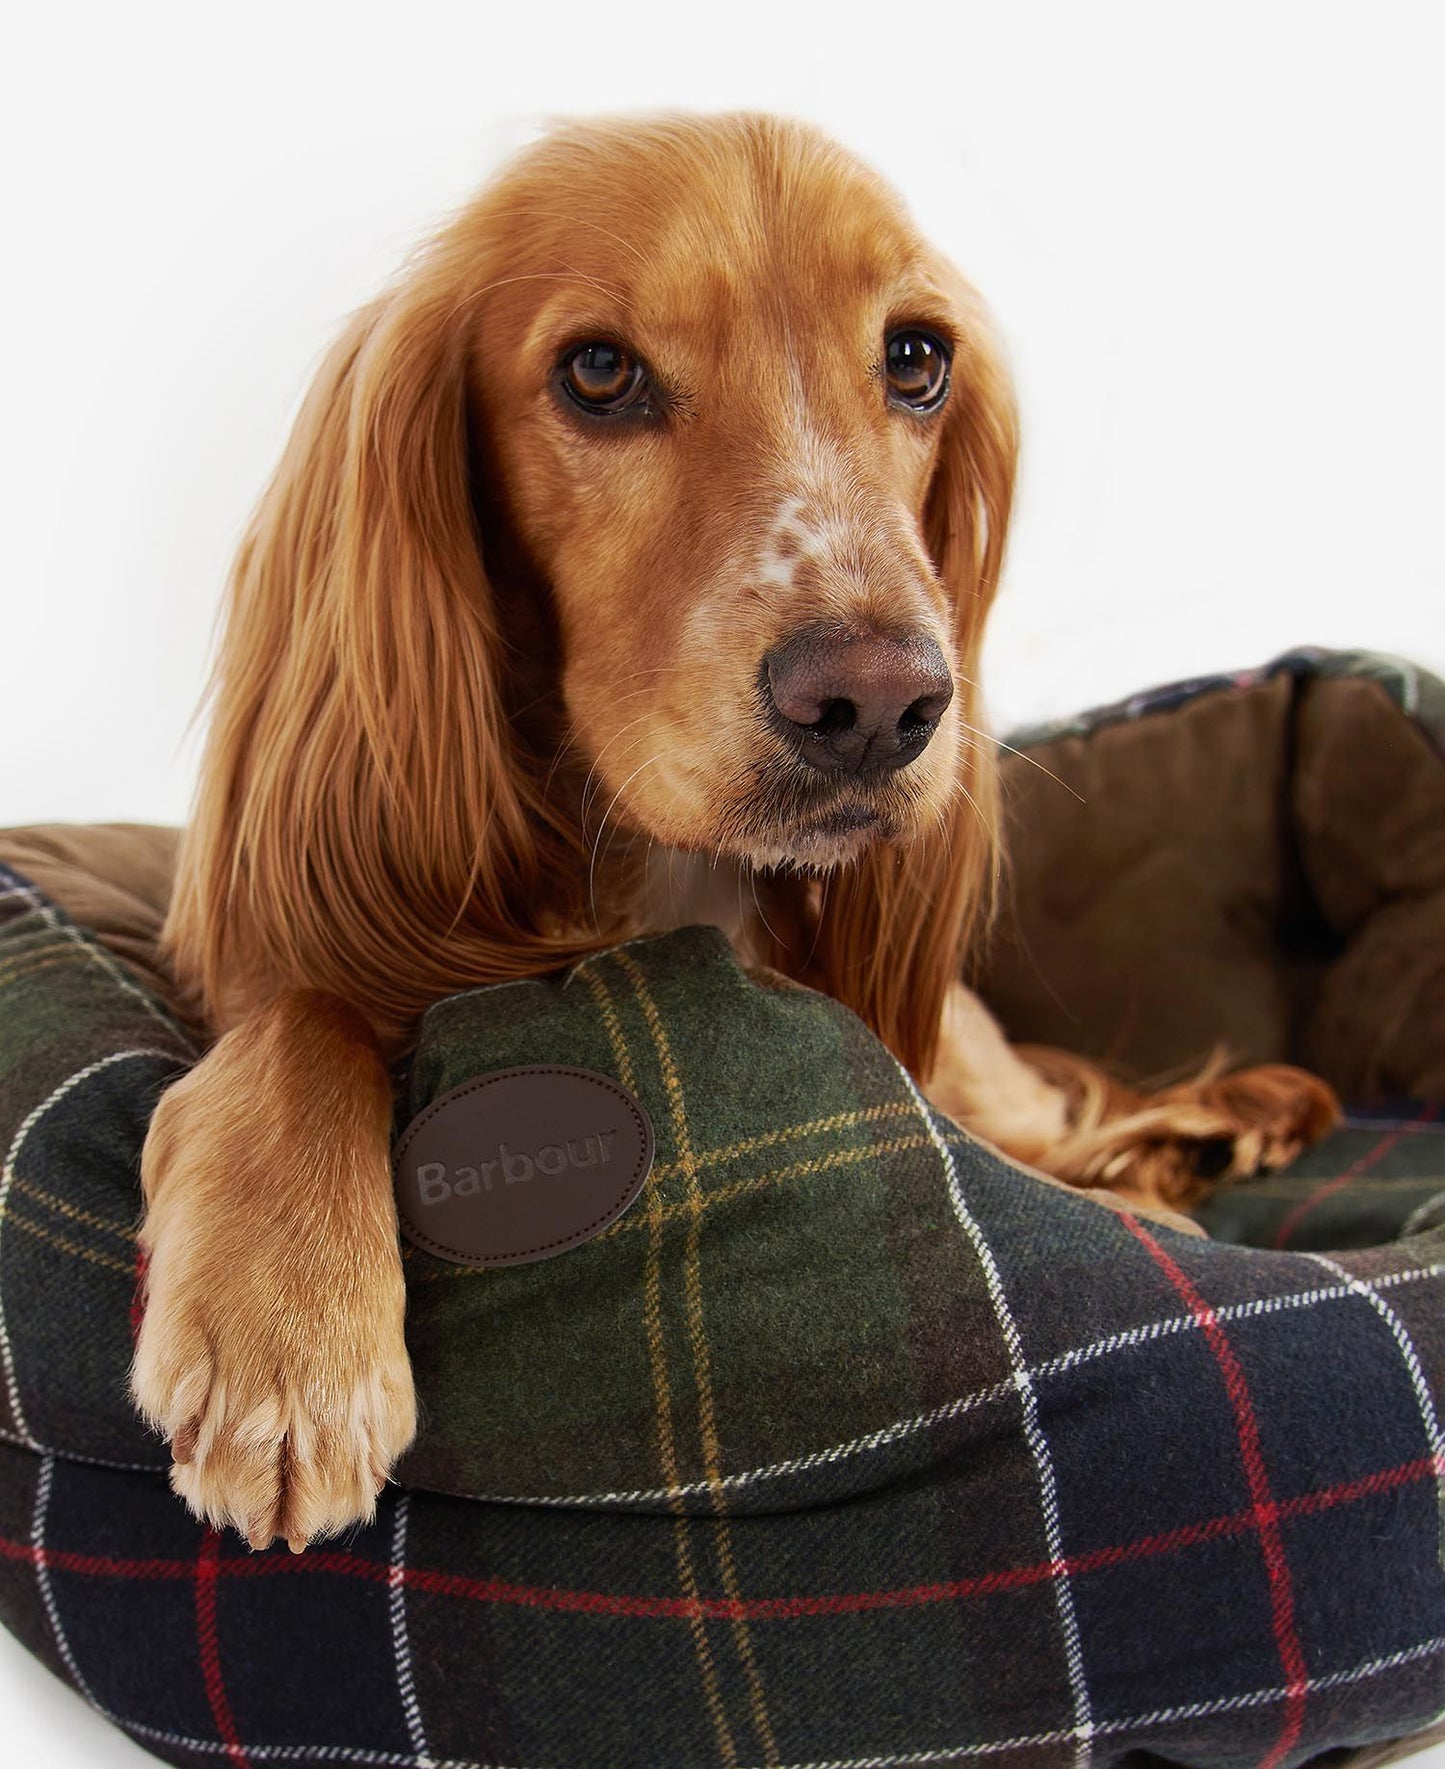 Barbour Luxury Dog Bed 30in